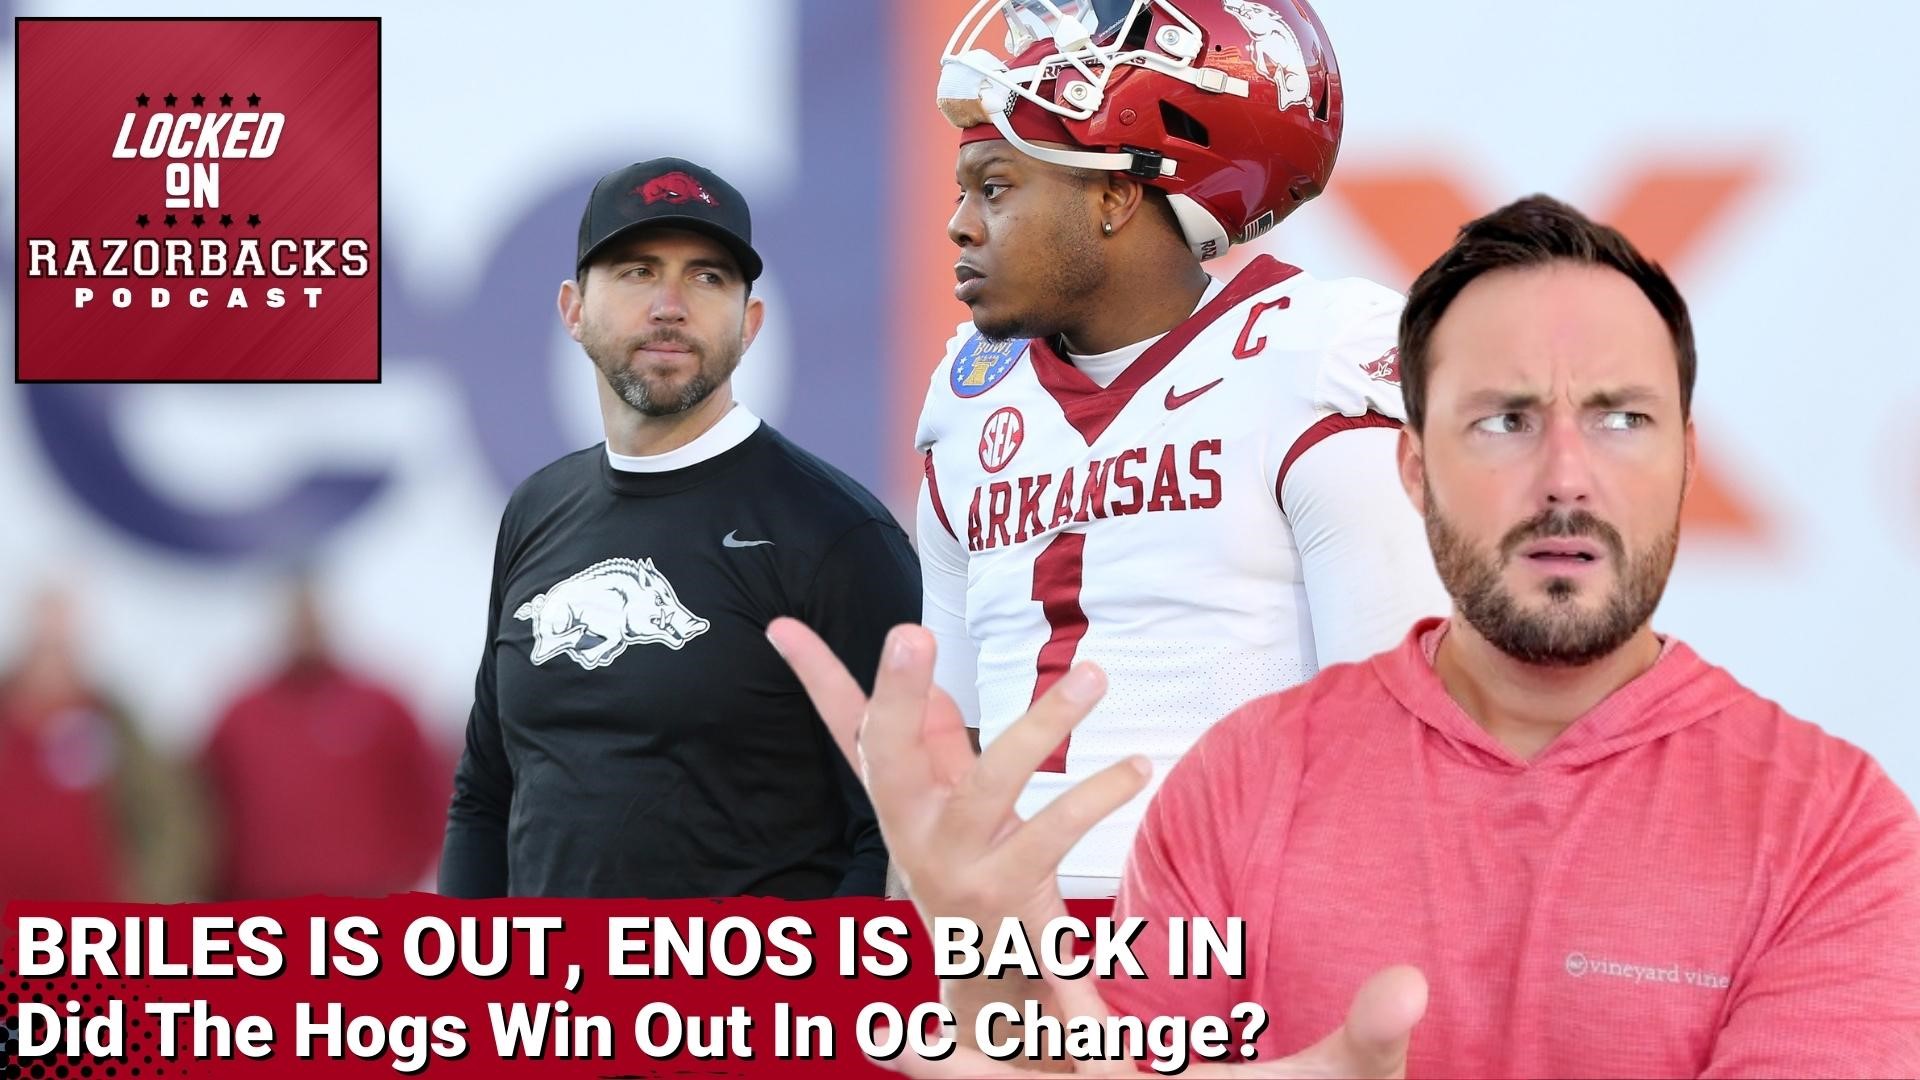 Kendall Briles leaves Arkansas to become the new offensive coordinator at TCU just weeks after saying he was coming back in 2023 and Dan Enos replaces him.